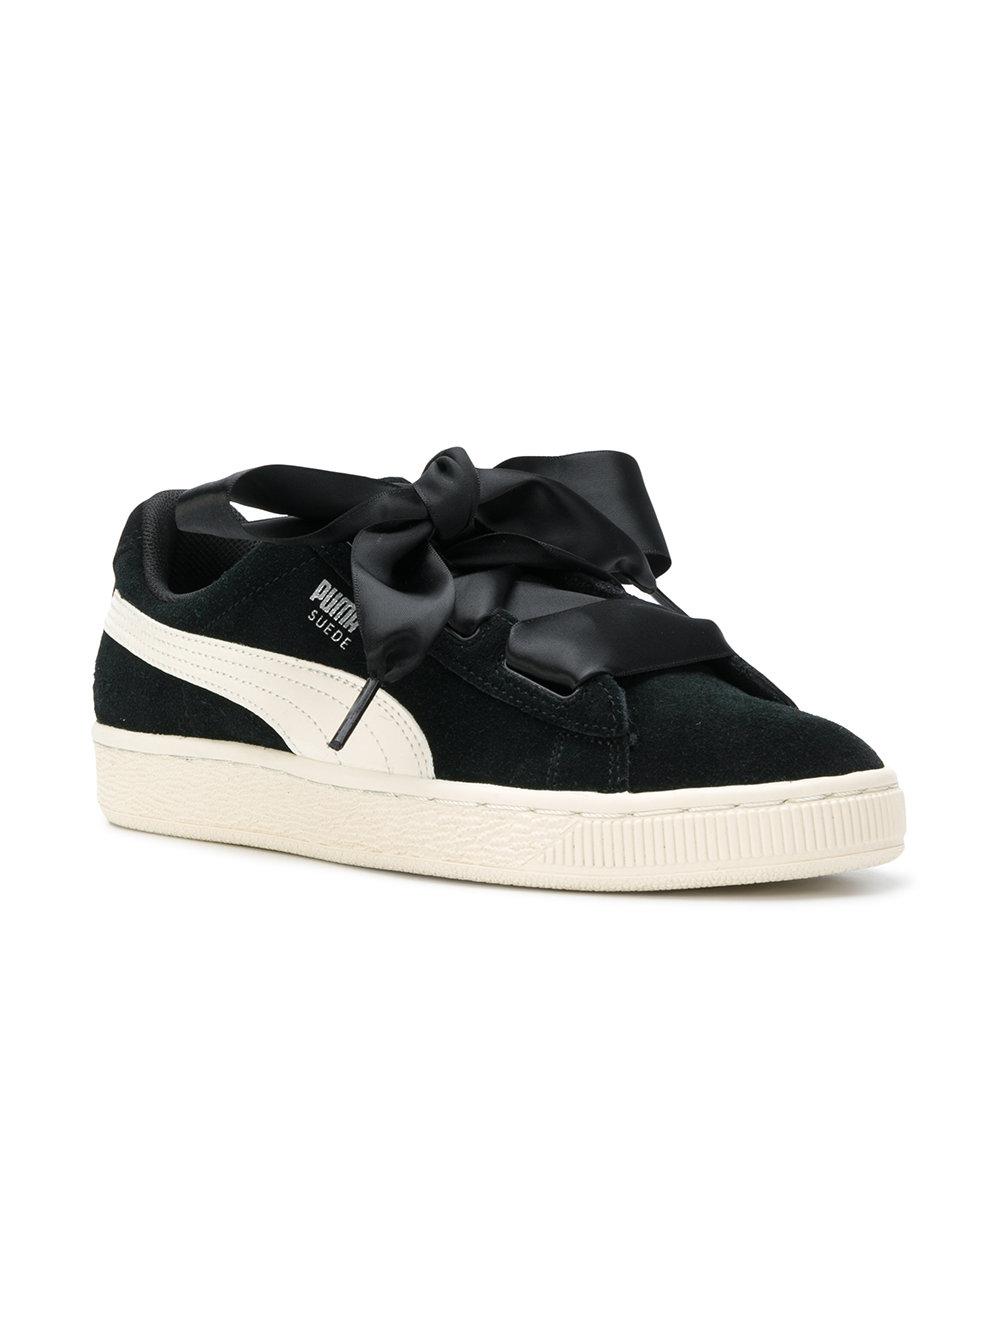 puma shoes with ribbon laces